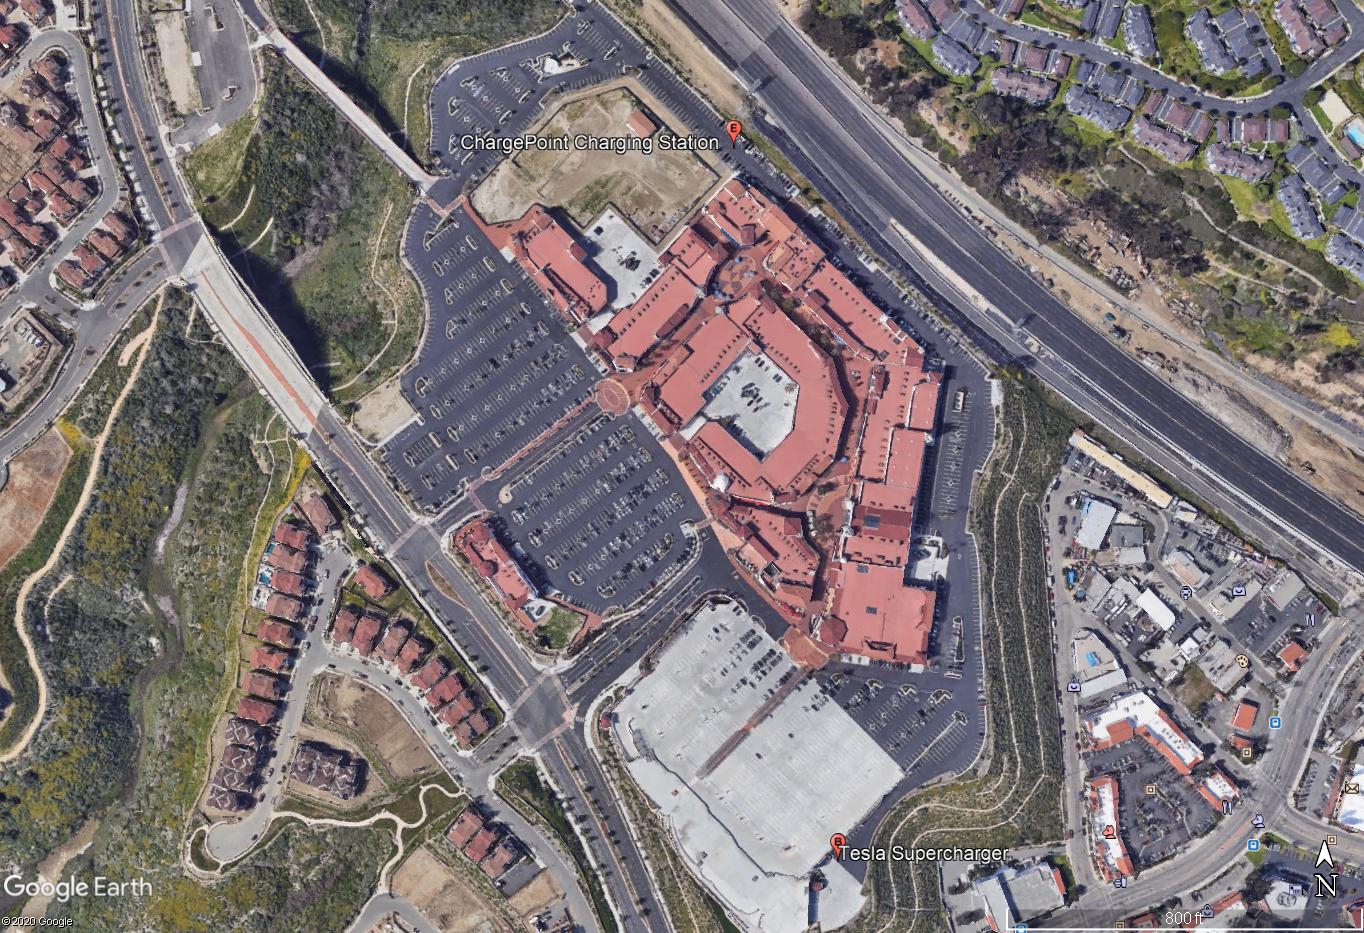 Satellite View of San Clemete Supercharger Station.jpg